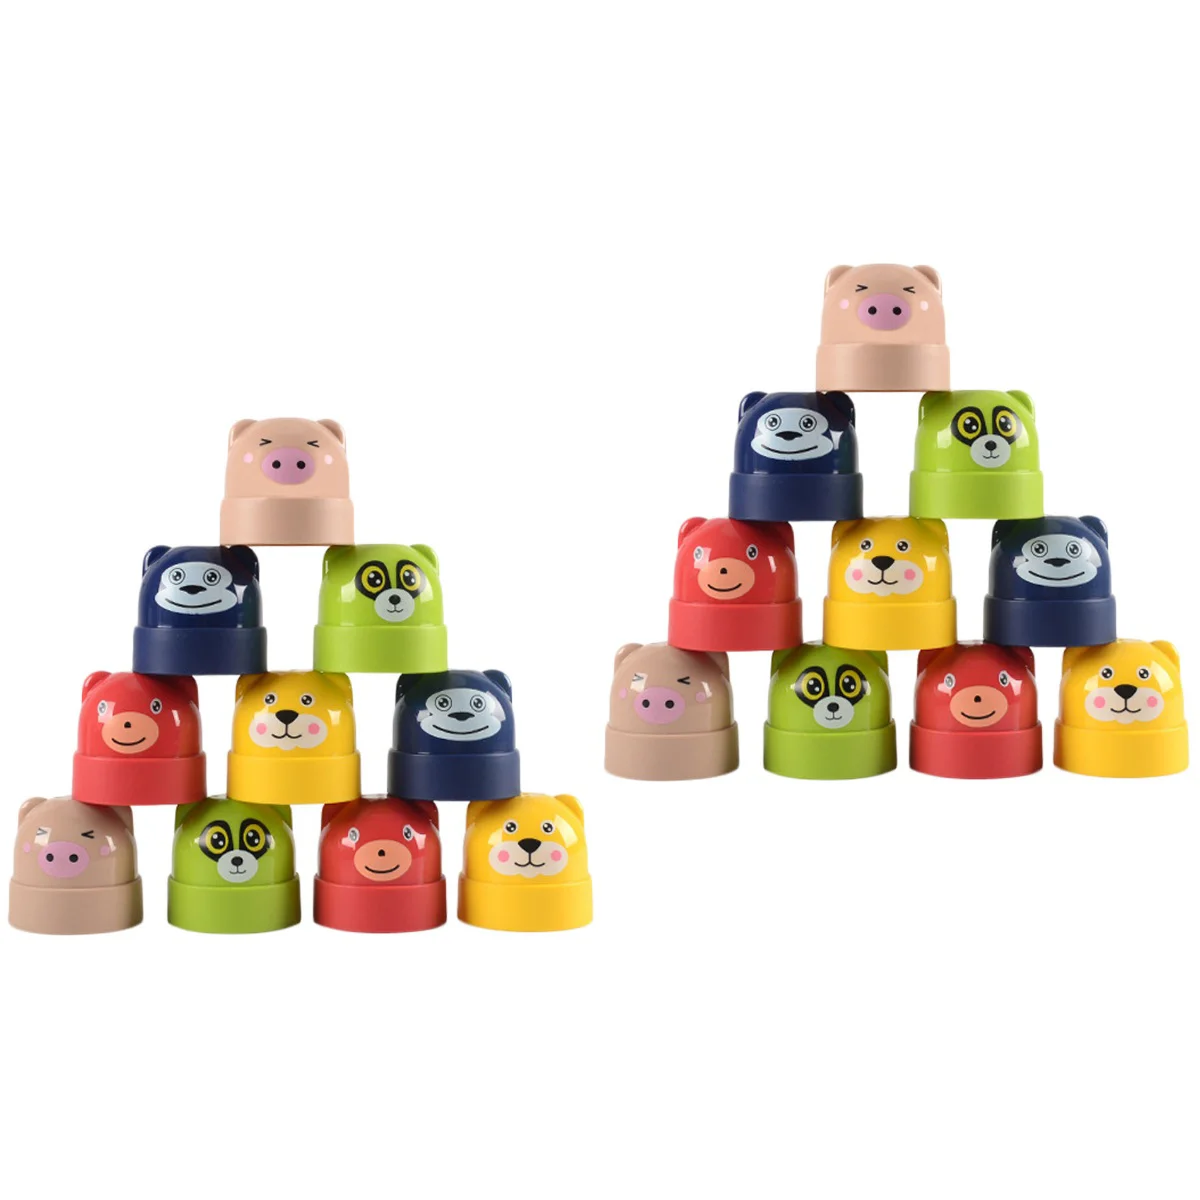 

Stacking Toys Blocks Kids Toy Educational Building Block Wooden Early Child Learning Cartoon Tower Developmental Matching